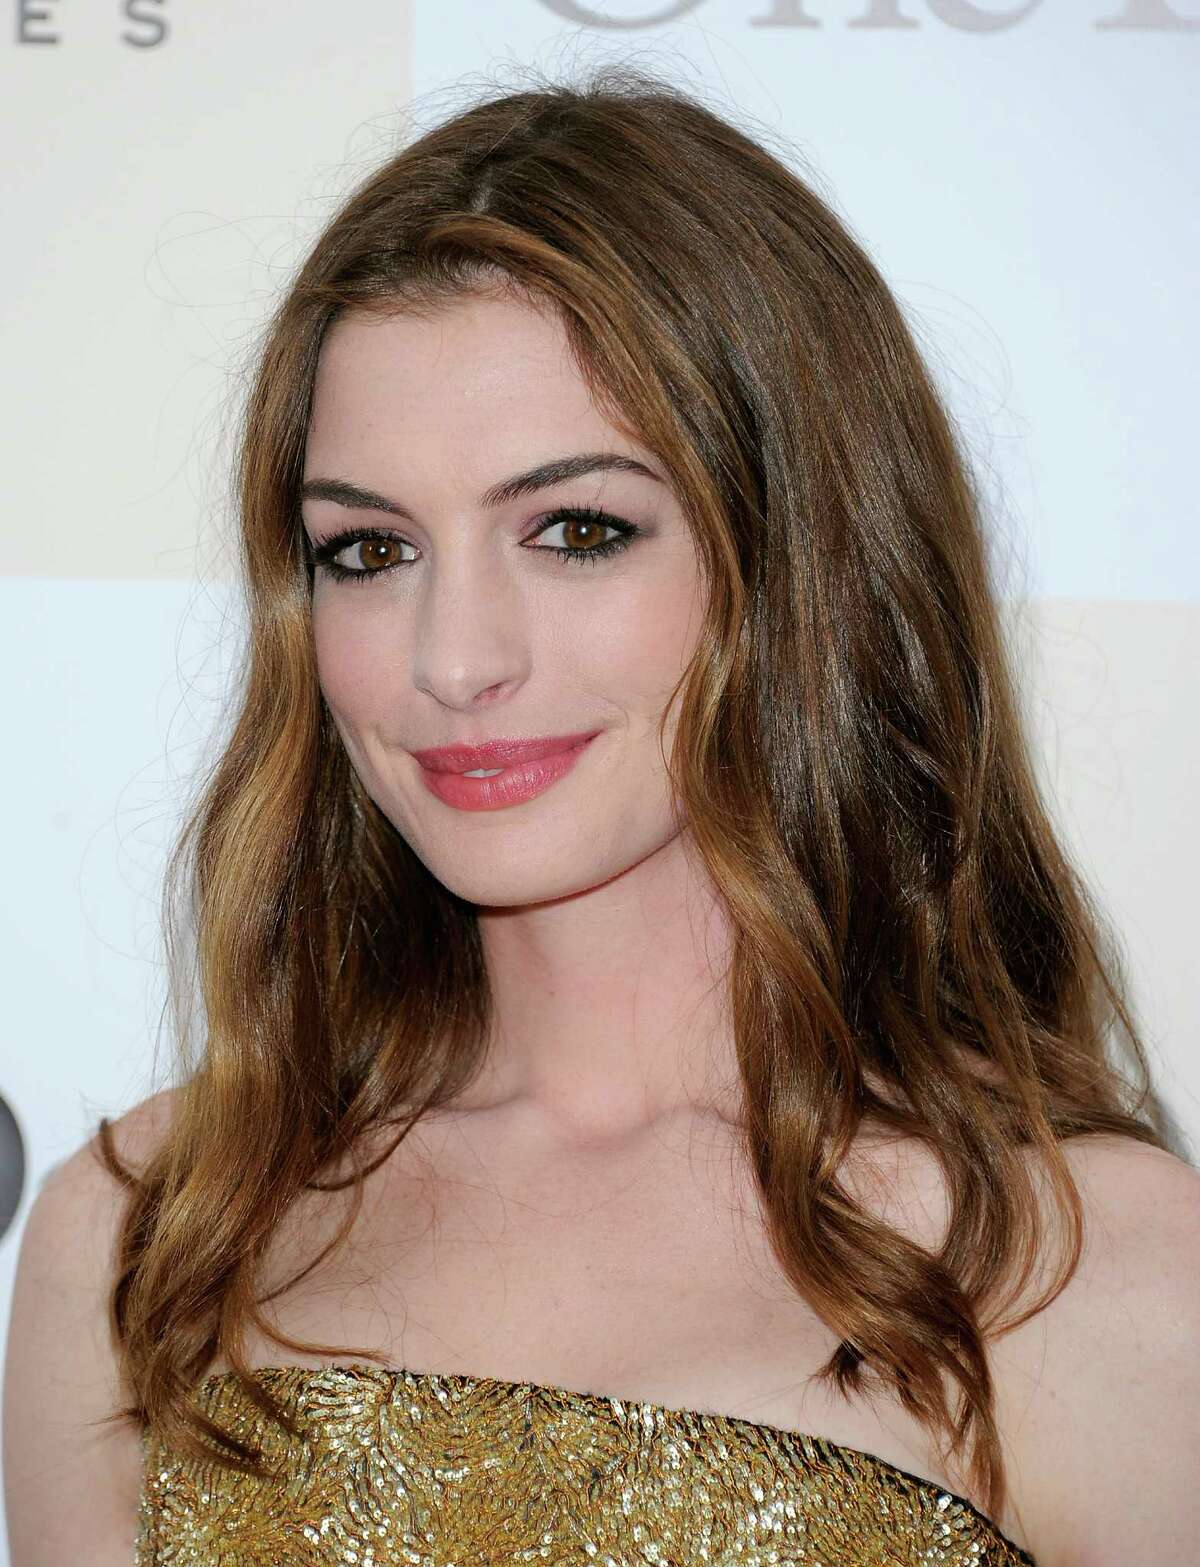 Anne Hathaway recently said that she lost too much weight — 25 pounds — for her role as Fantine in "Les Miserables." She said, “I lost the first 10 (pounds) in three weeks through a detox and then I lost the subsequent 15 in 14 days by doing food deprivation and exercise, which I don’t recommend."